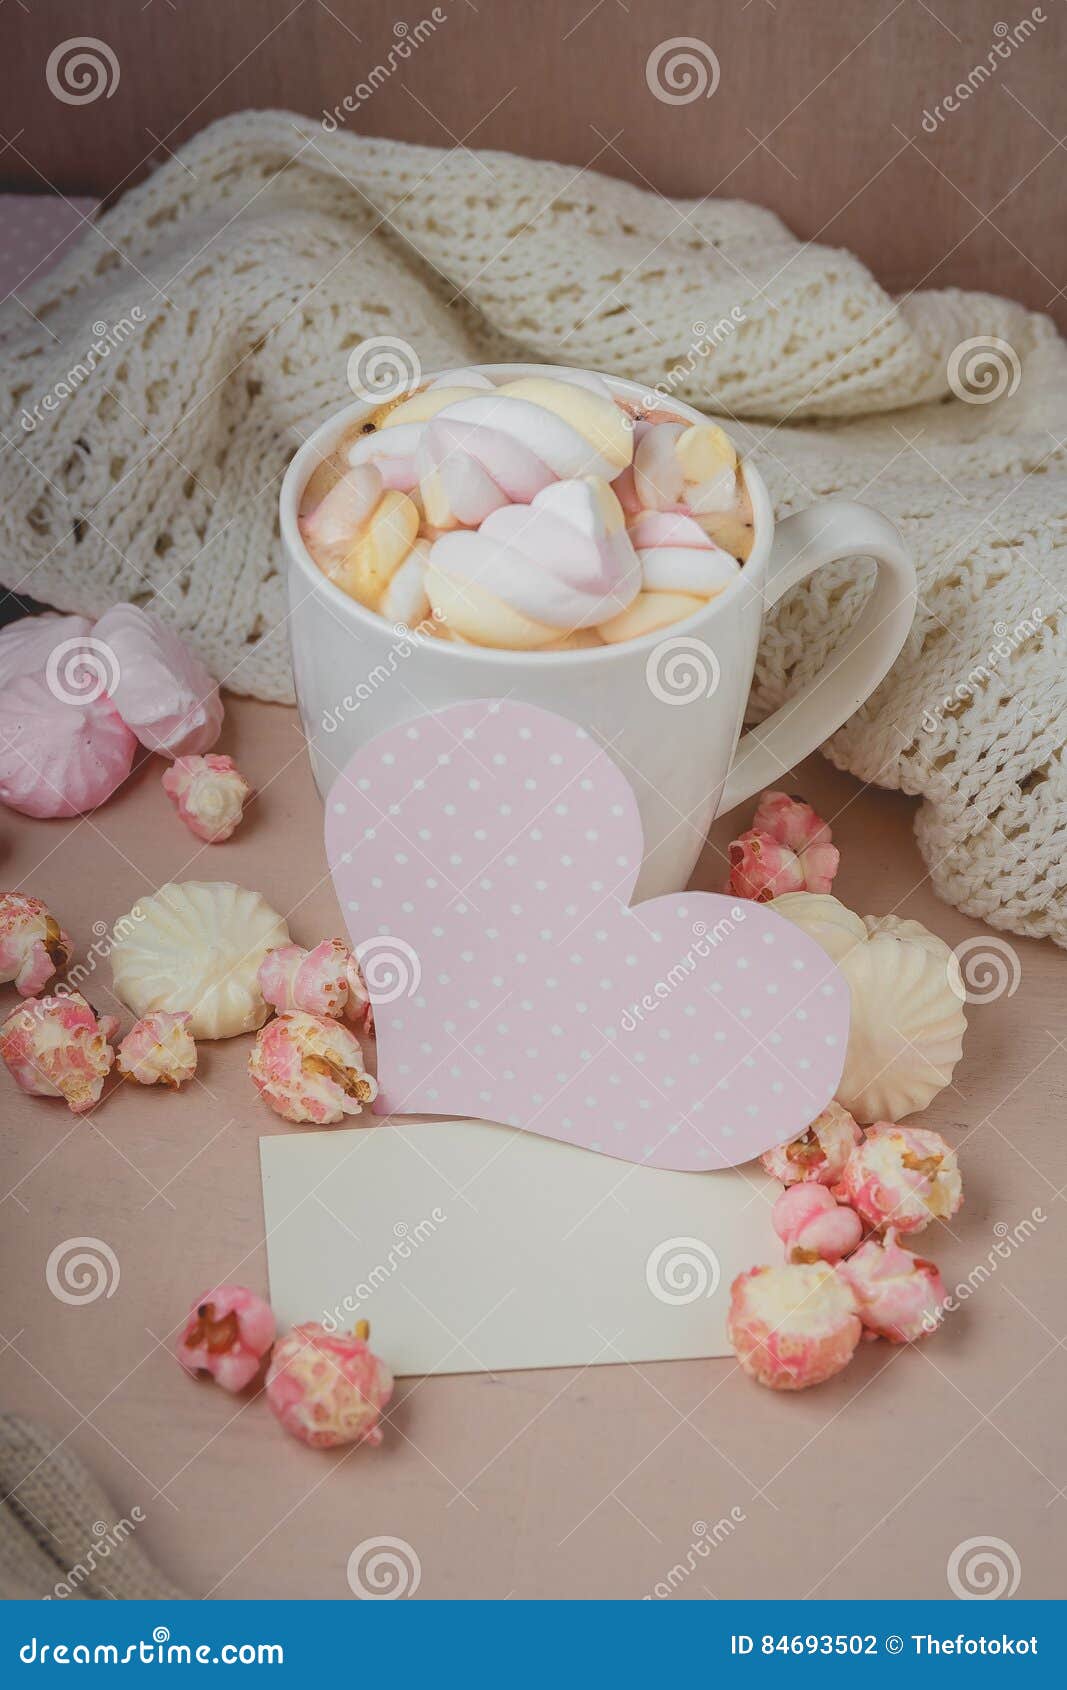 Good Morning with Hot Chocolate on Wooden Table Stock Photo - Image of ...